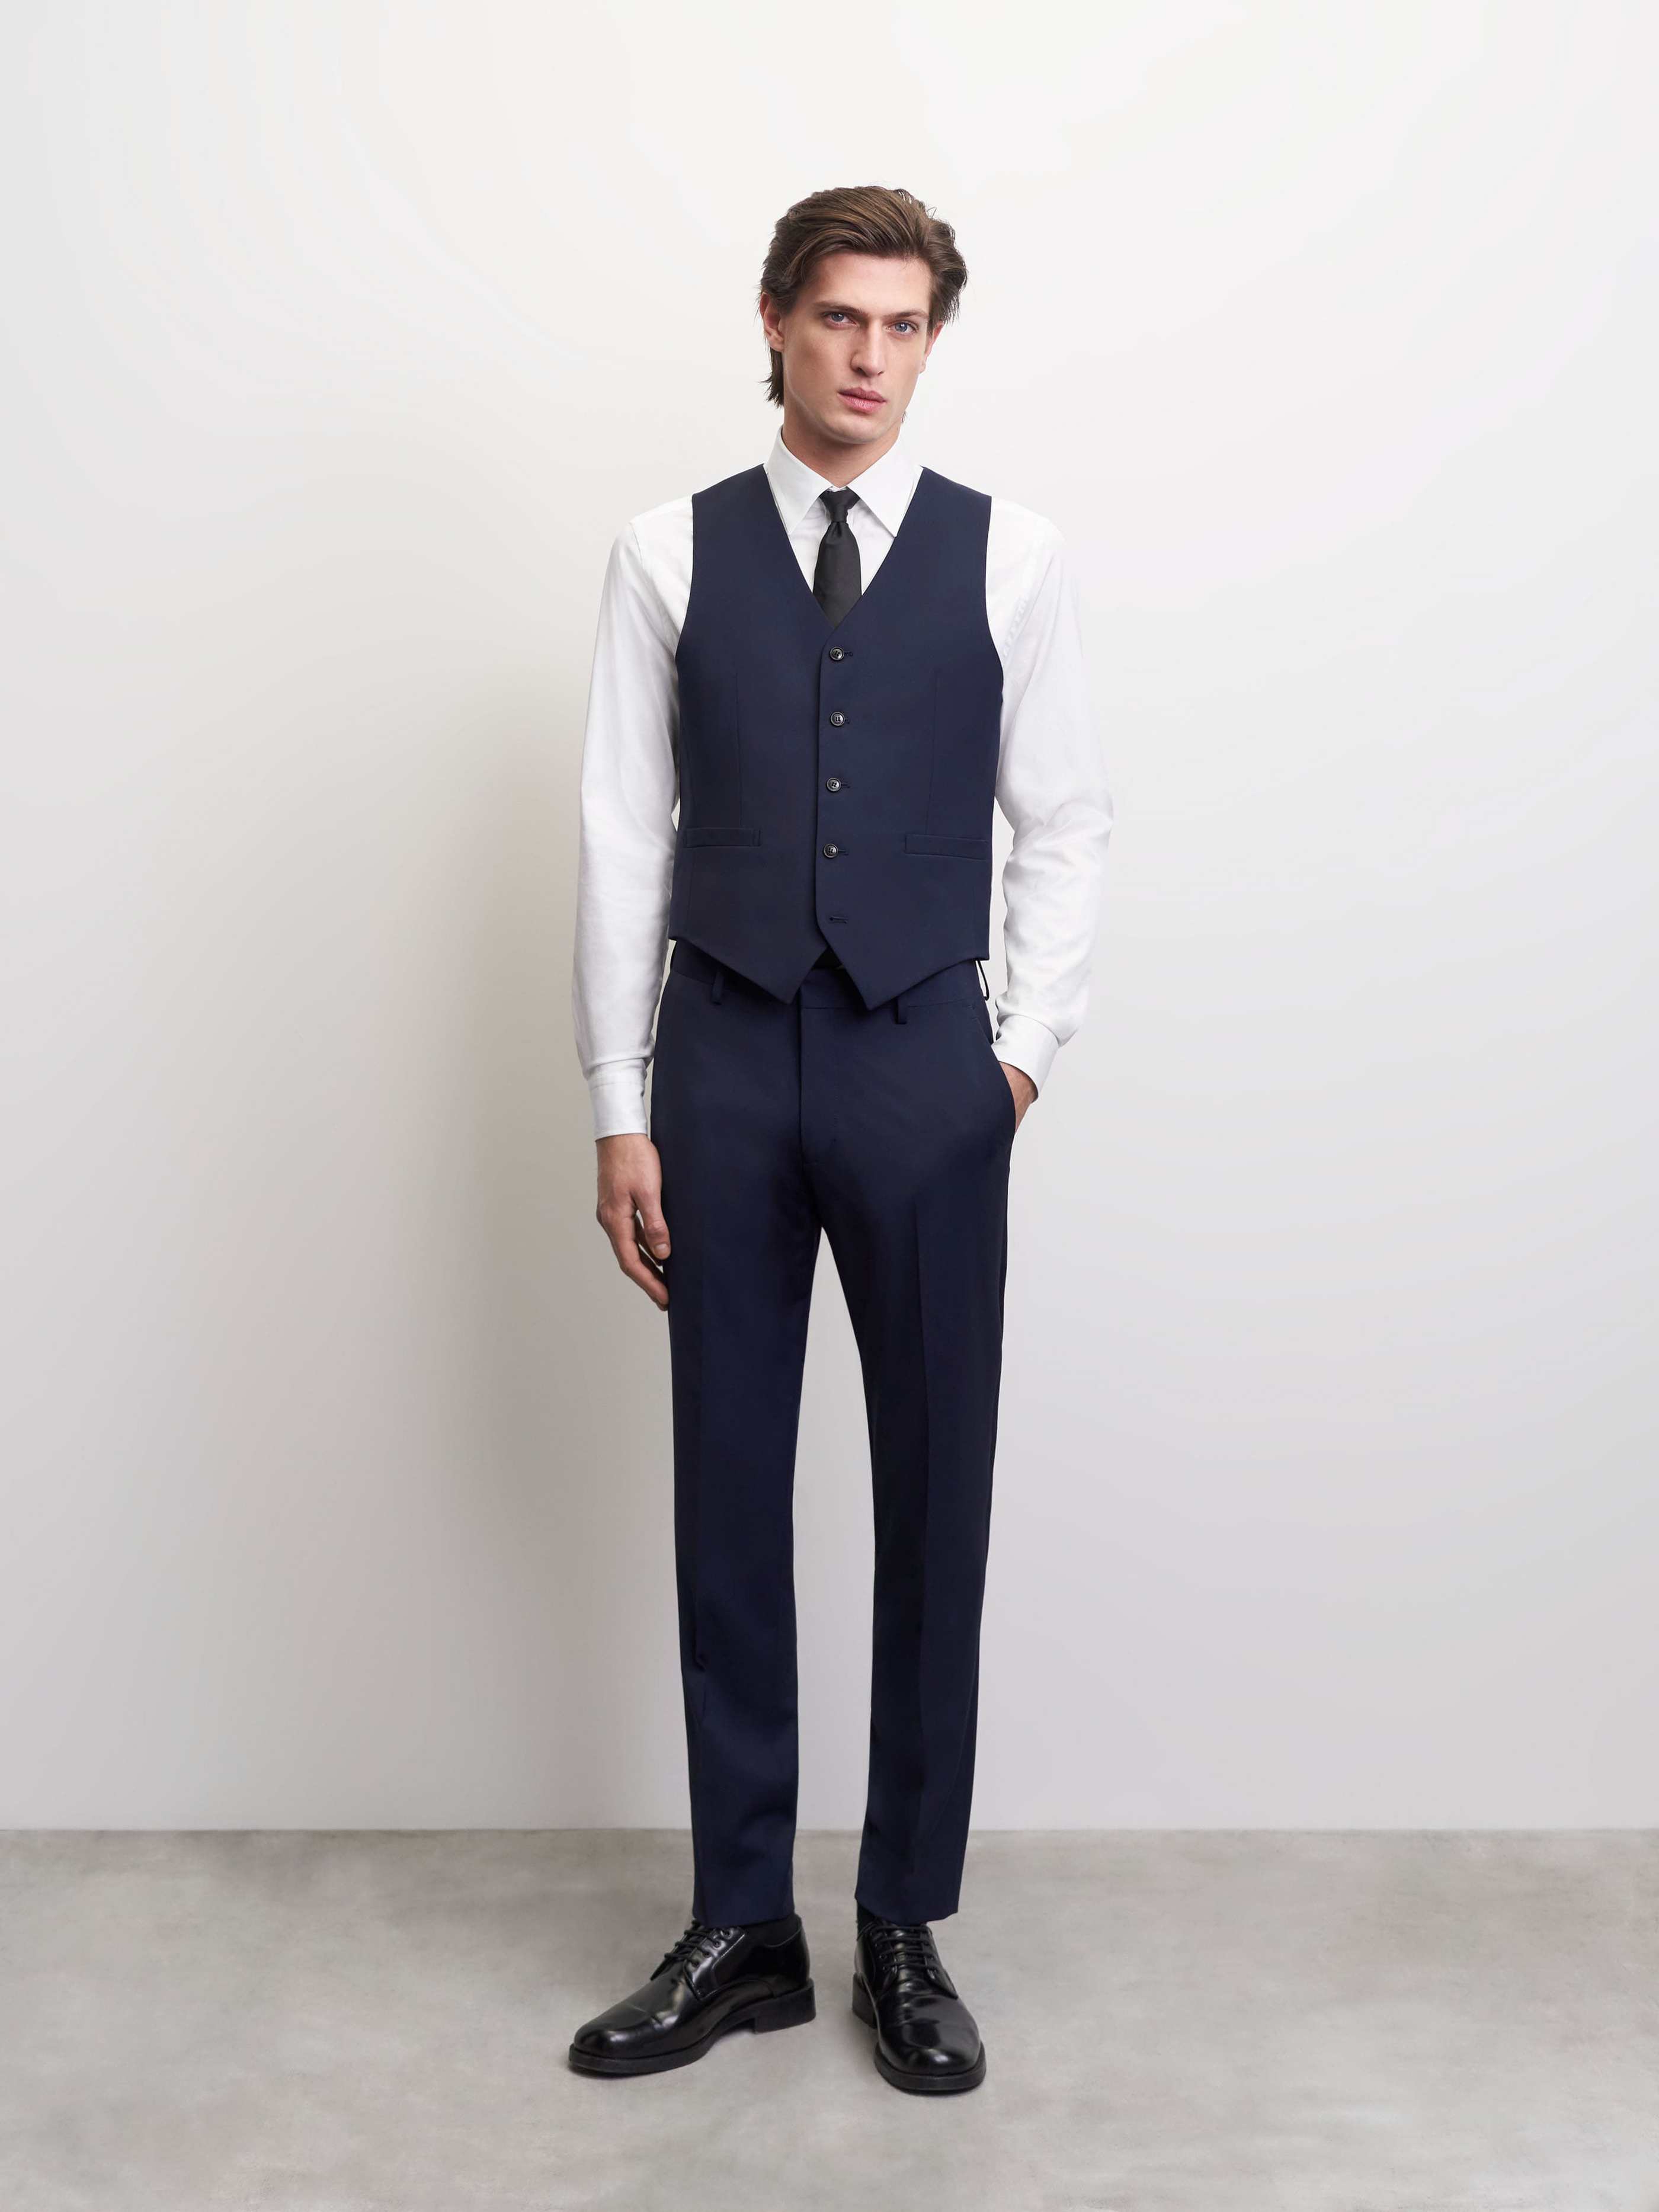 TIGER OF SWEDEN Wayde Waistcoat in Navy T70699015Z 44 25D-ROYAL BLUE FROM EIGHTYWINGOLD - OFFICIAL BRAND PARTNER